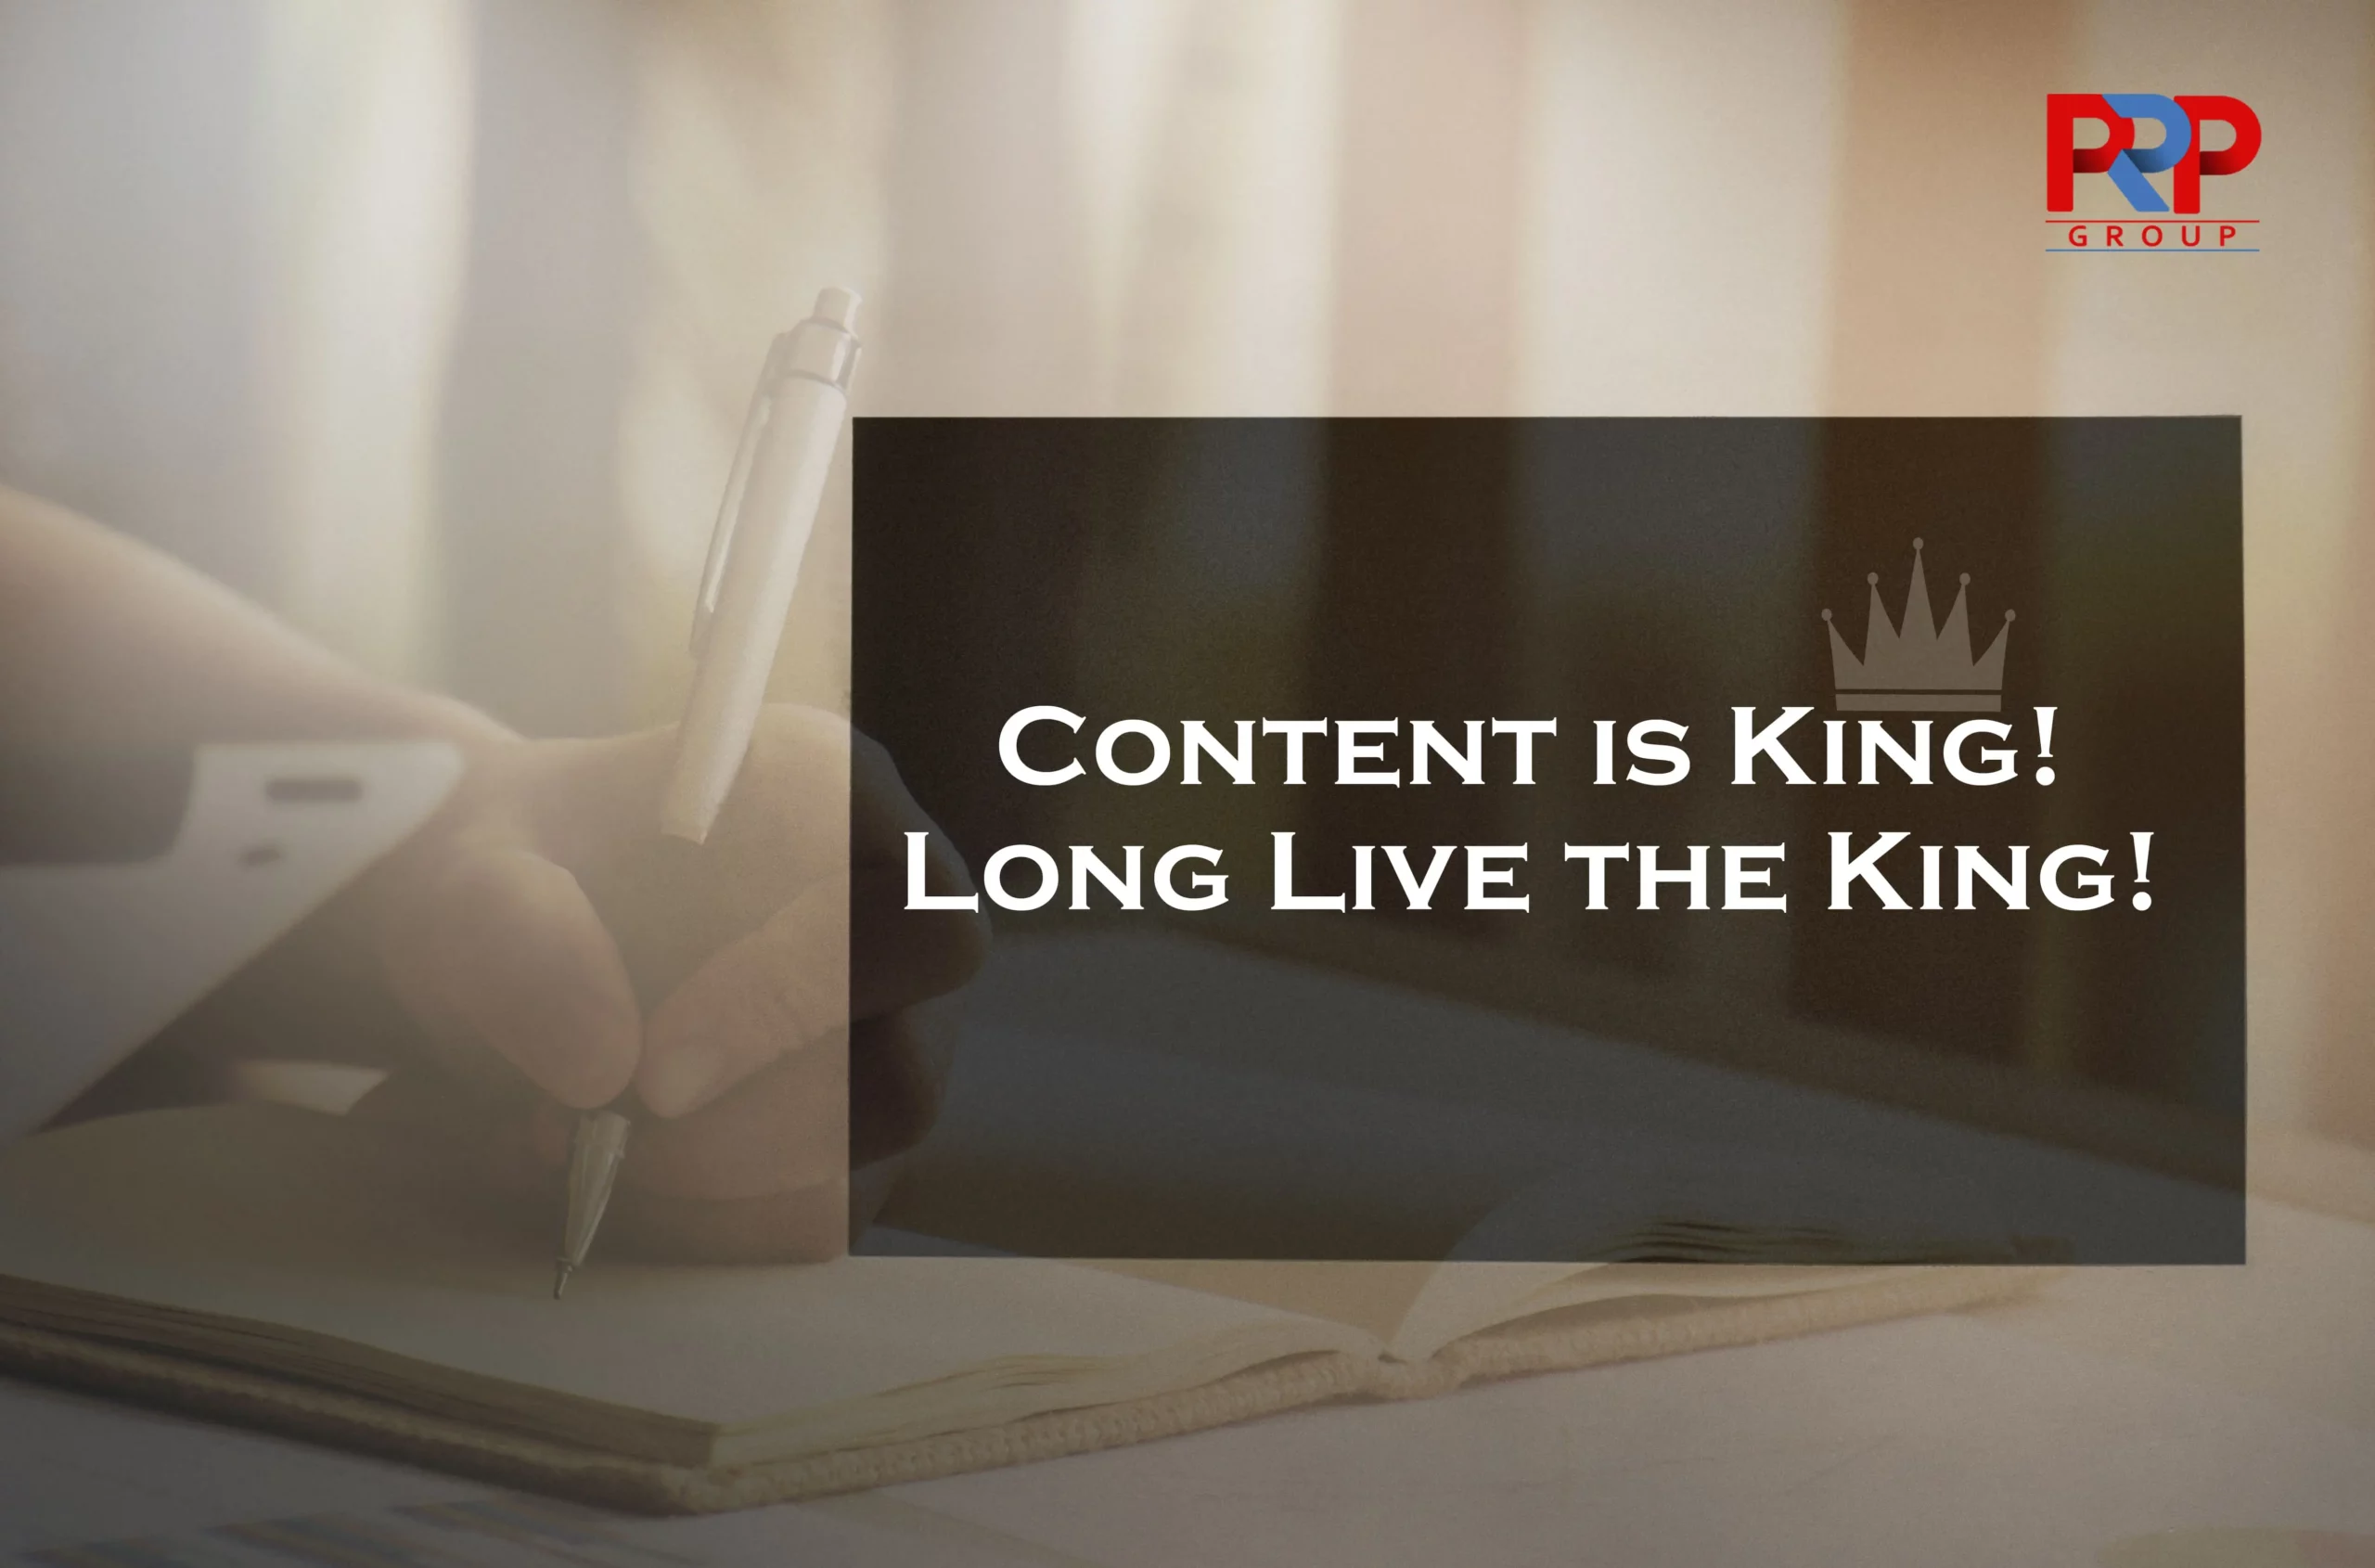 Content is king! Long live the king!